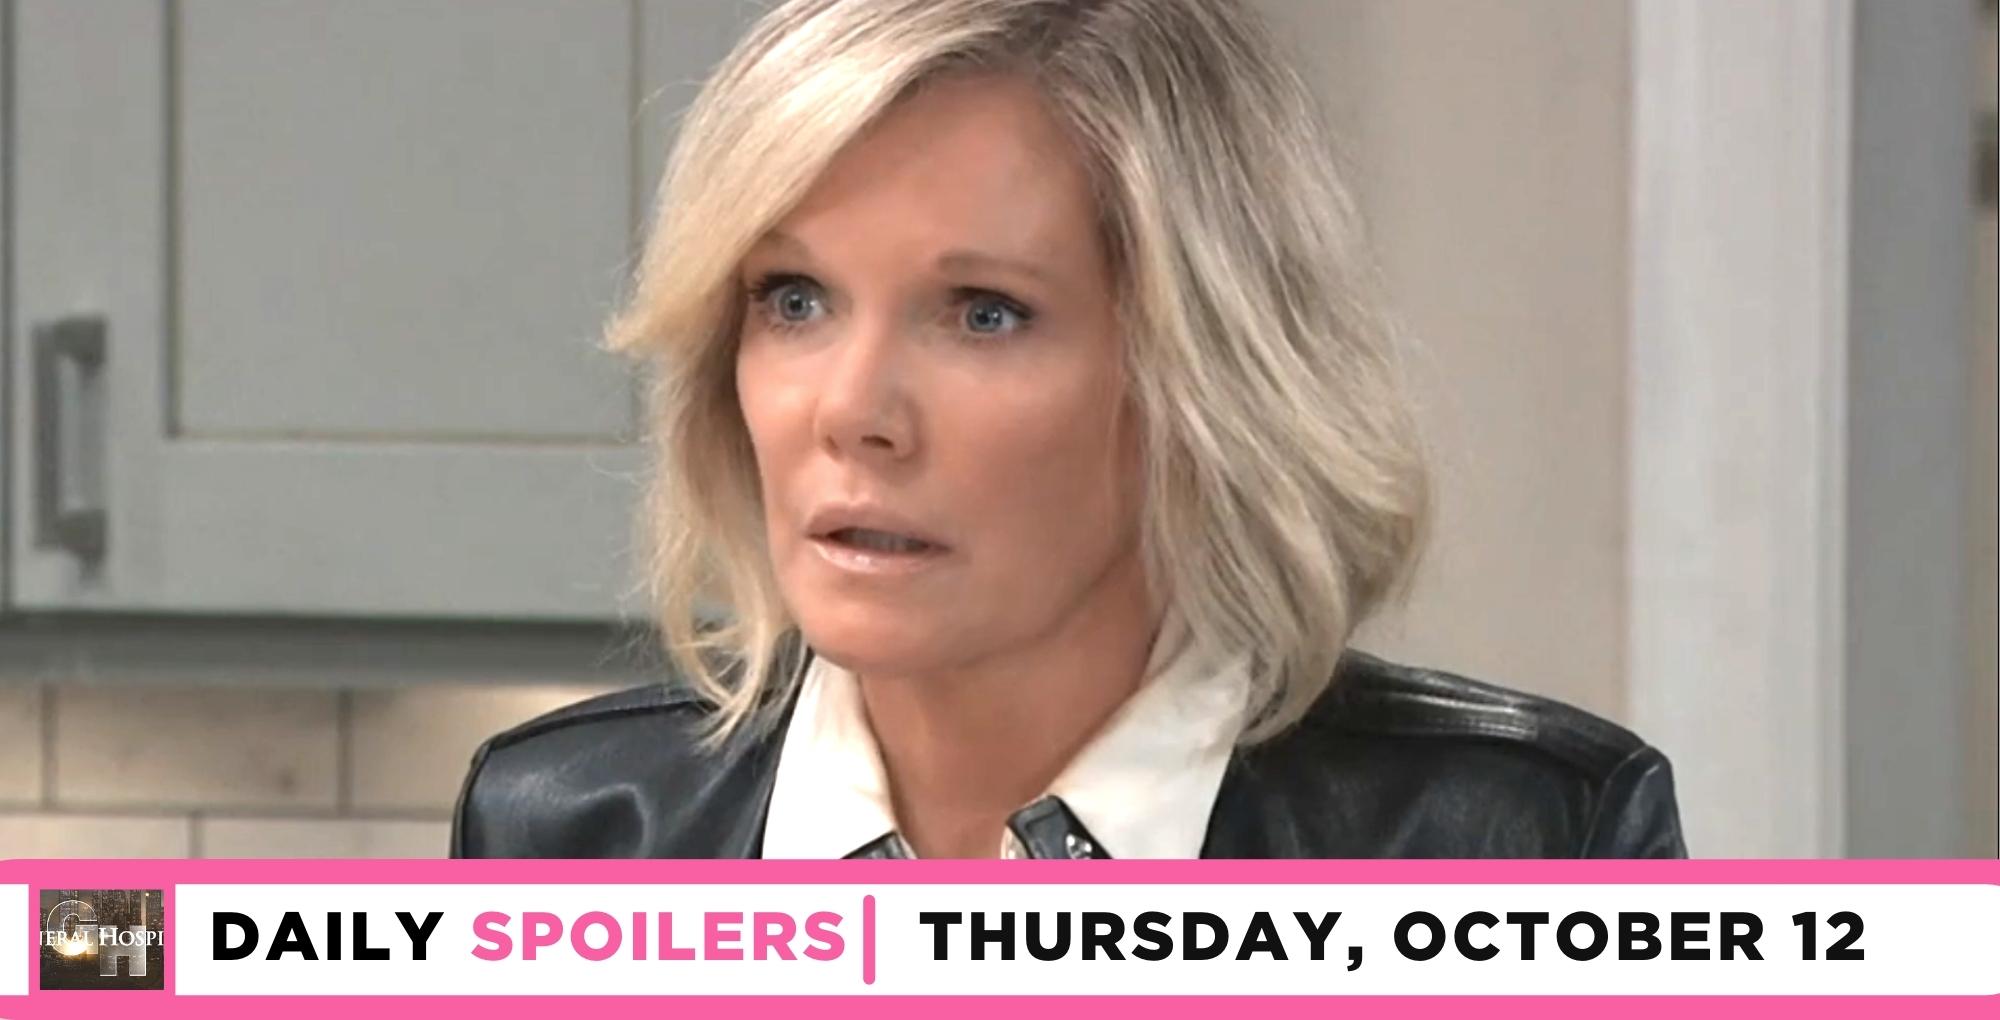 General Hospital Spoilers Where In The World Is Ava Jerome?